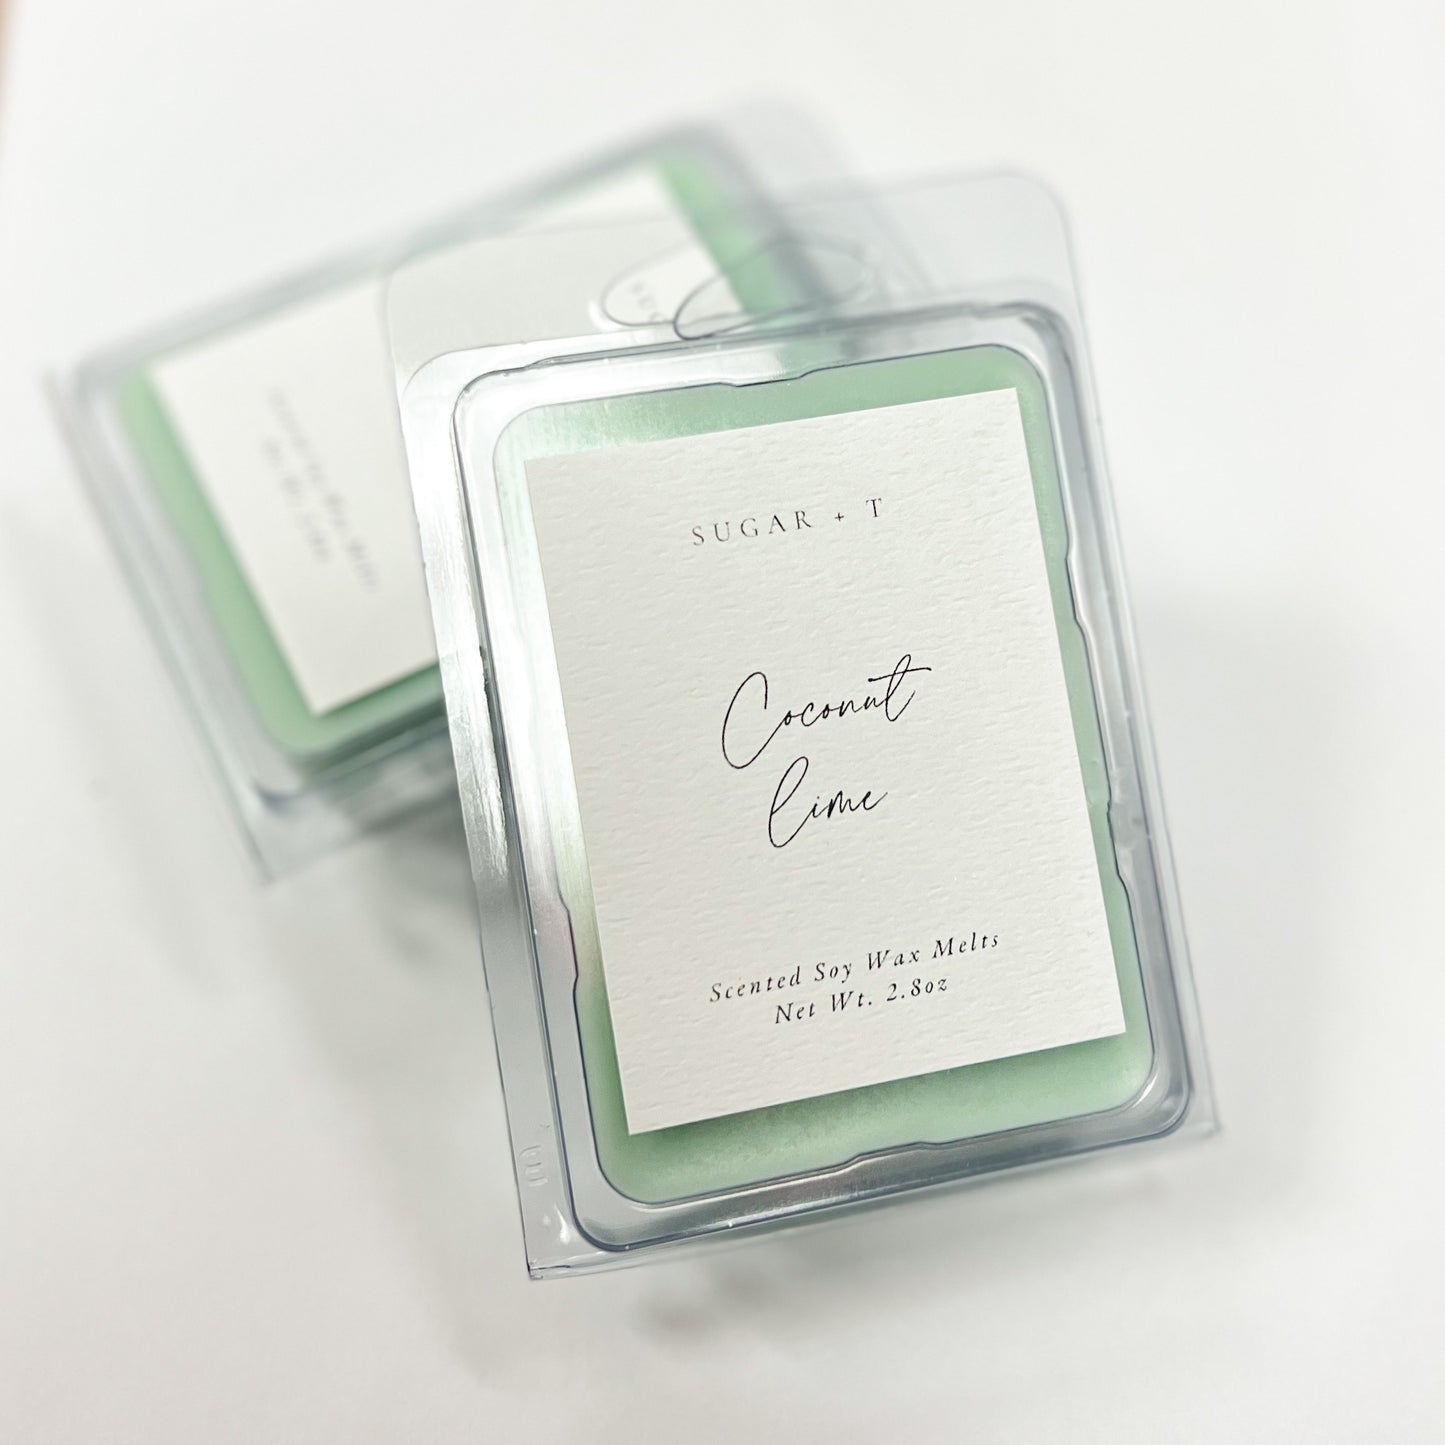 Coconut Lime Scented Wax Melts